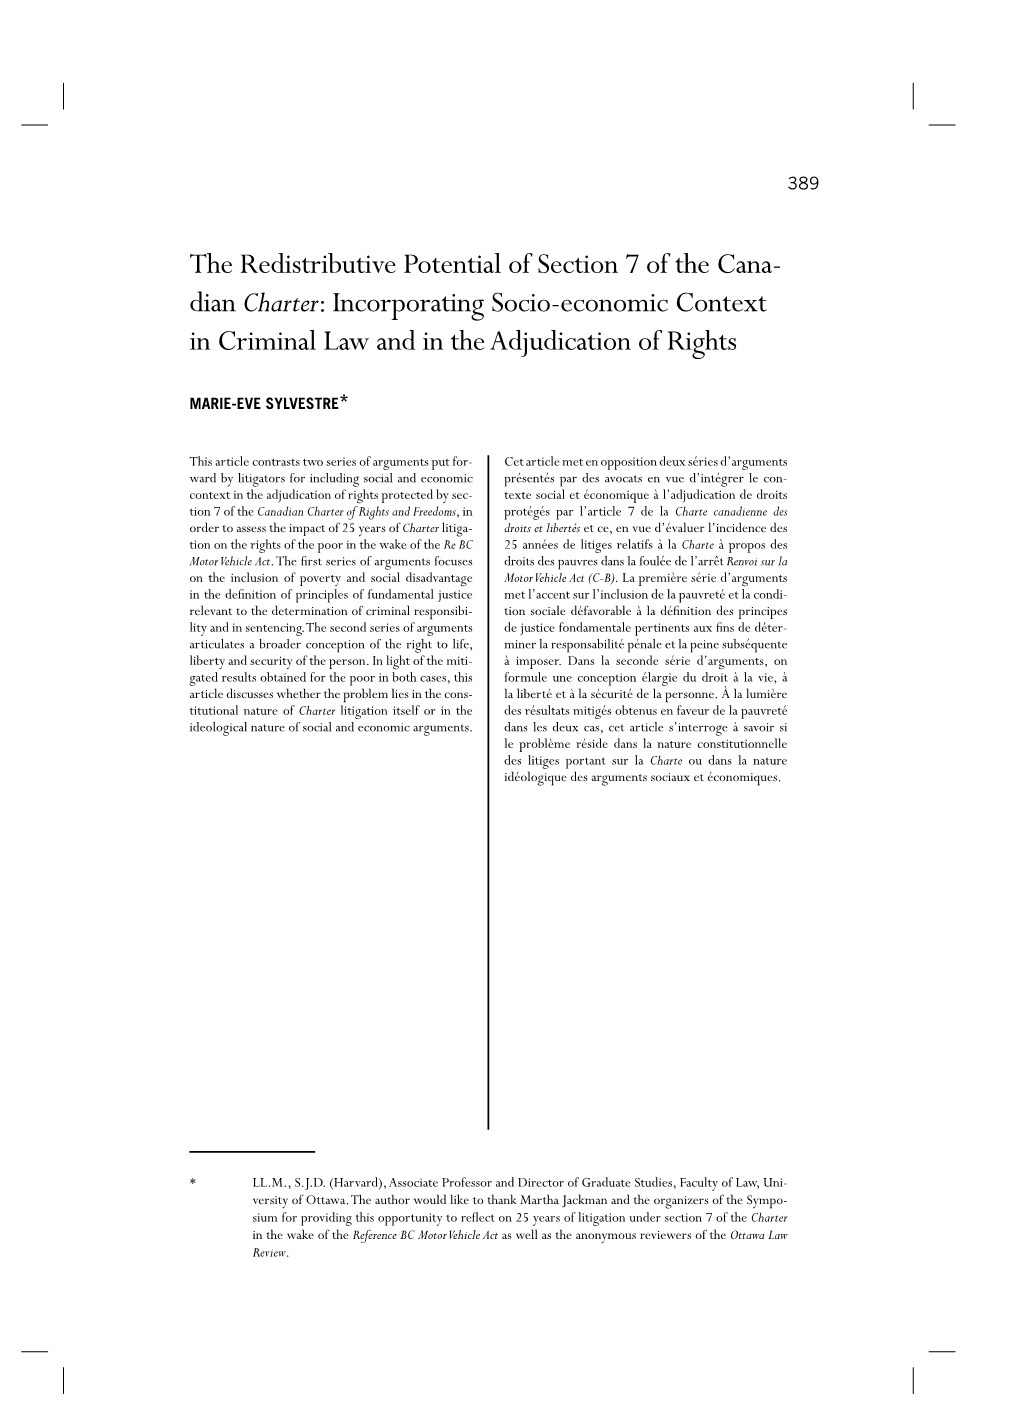 The Redistributive Potential of Section 7 of the Cana- Dian Charter: Incorporating Socio-Economic Context in Criminal Law and in the Adjudication of Rights